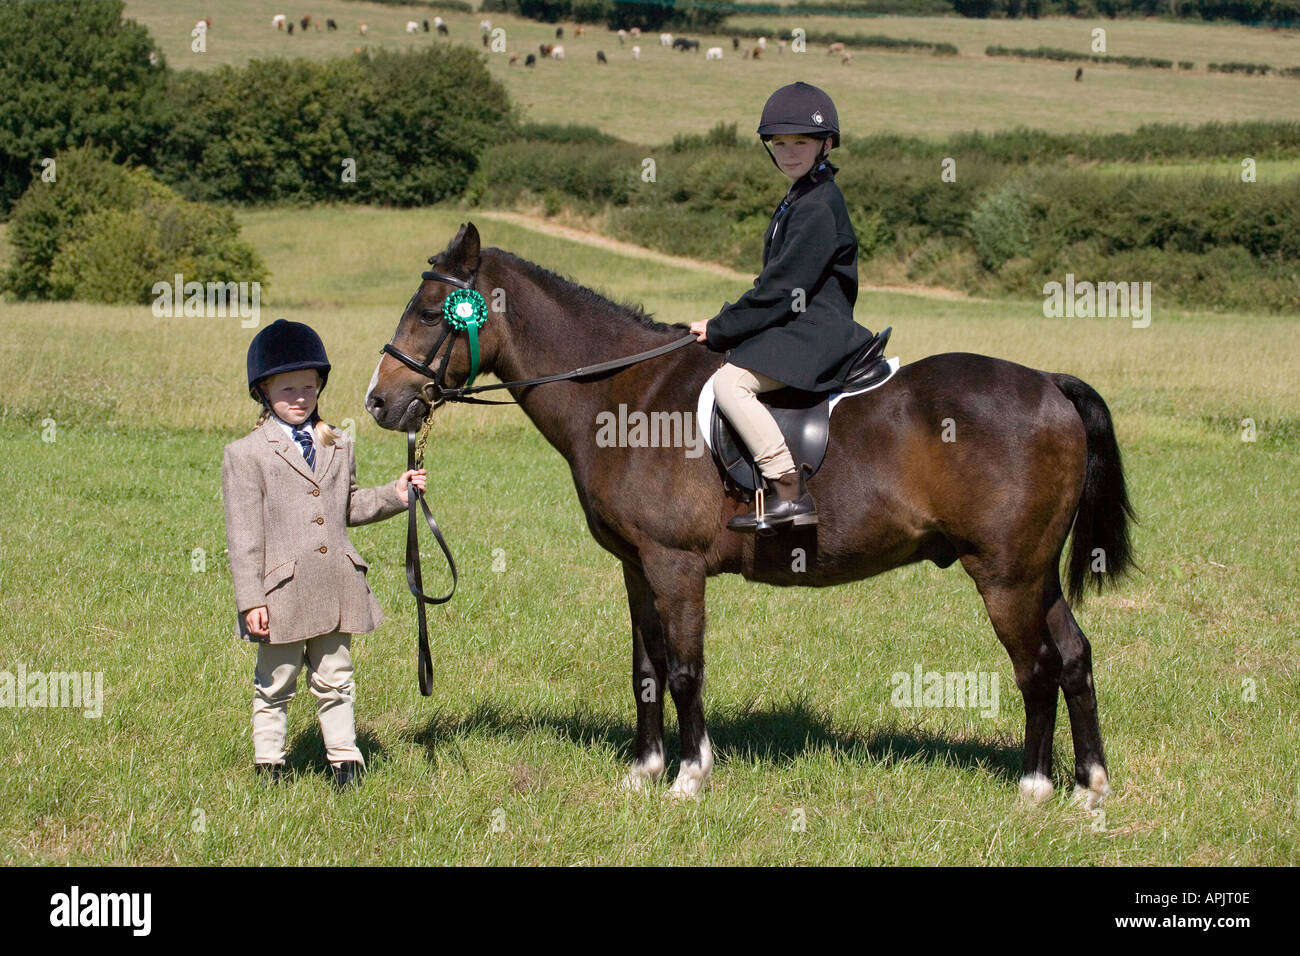 TWO LITTLE GIRLS IN RIDING OUTFITS WITH PONY IN FIELD UK Stock Photo